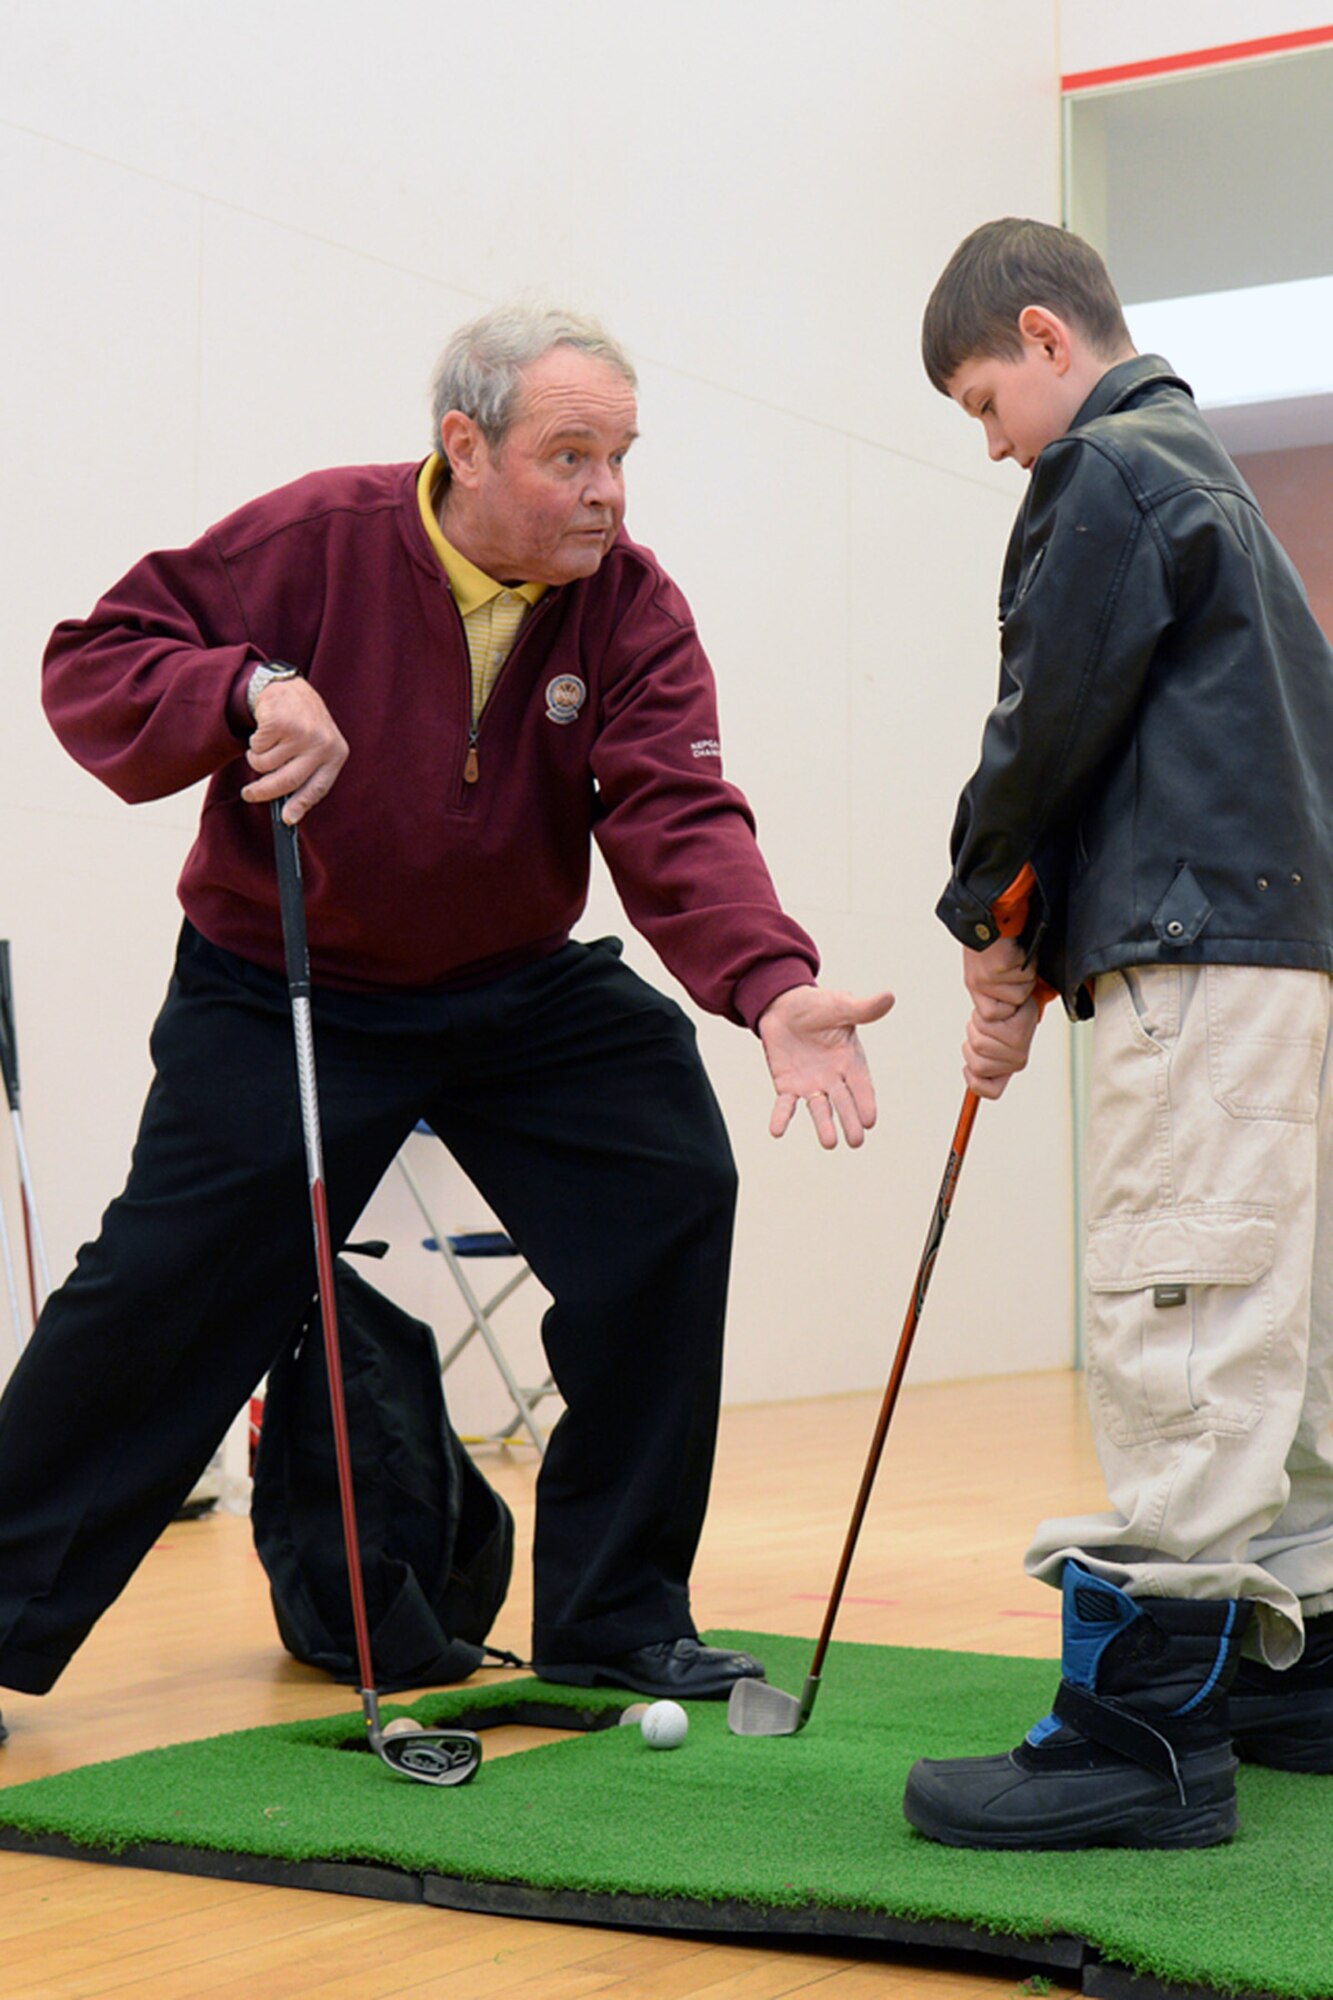 Jim Tobin, Patriot Golf Course instructor, works with Joshua St. Pierre on his golf swing during the Health and Fitness Expo at the Fitness and Sports Center, March 25. The Fitness Center hosted various representatives from on- and off-base who provide attendee's health and fitness resources, as well as products and services to enhance wellness. (U.S. Air Force photo by Linda LaBonte Britt)